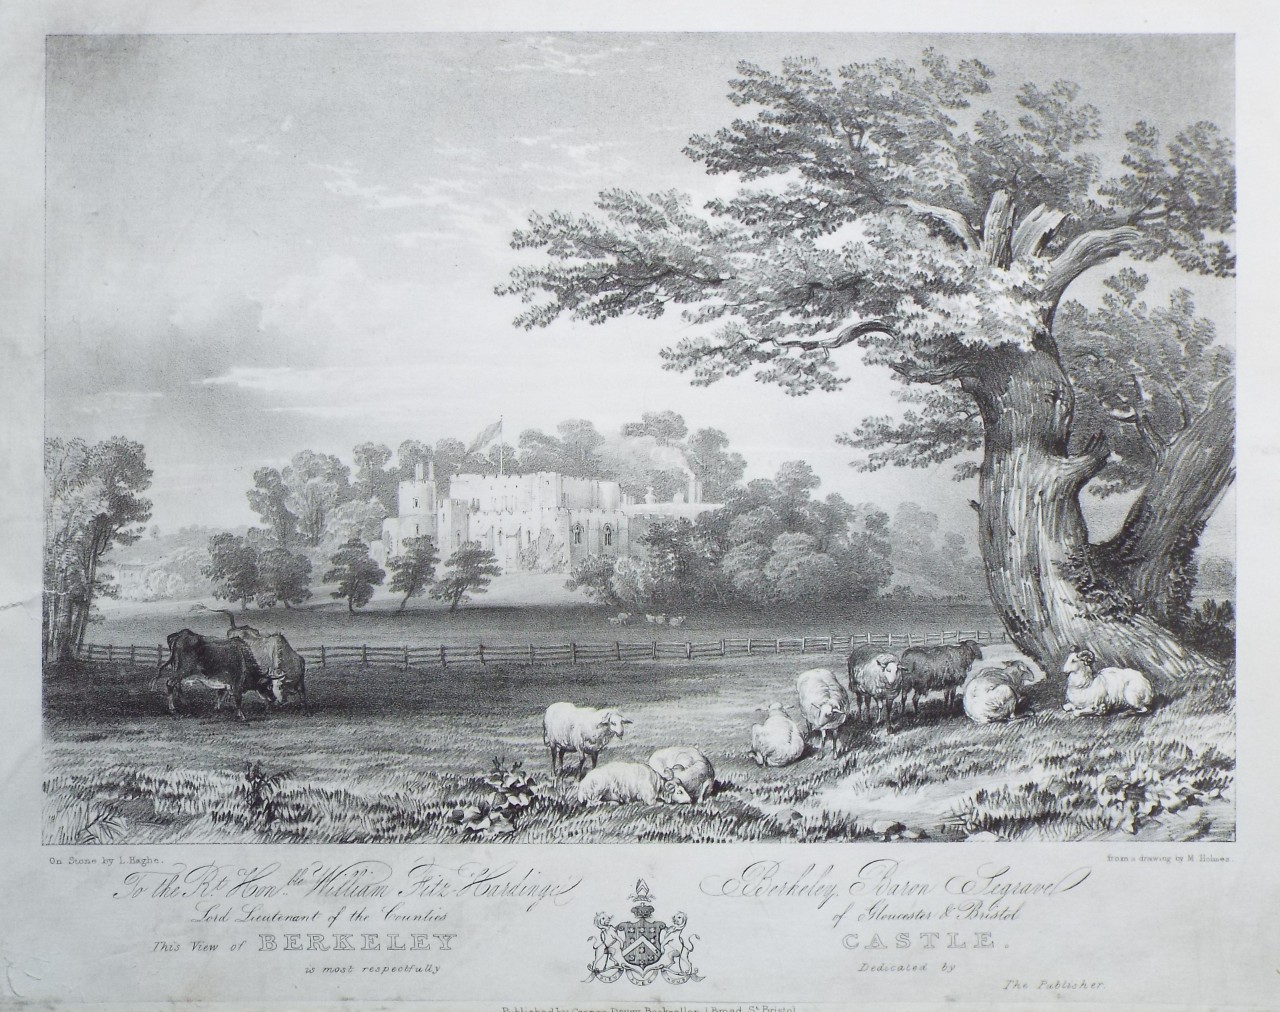 Lithograph - To the Rt. Honble. William Fitz Harding Berkeley Baron Segrave Lord Lieutenant of the Counties of Gloucester & Bristol, This View of Berkeley Castle. is most respectfully Dedicated by The Publisher - Laghe